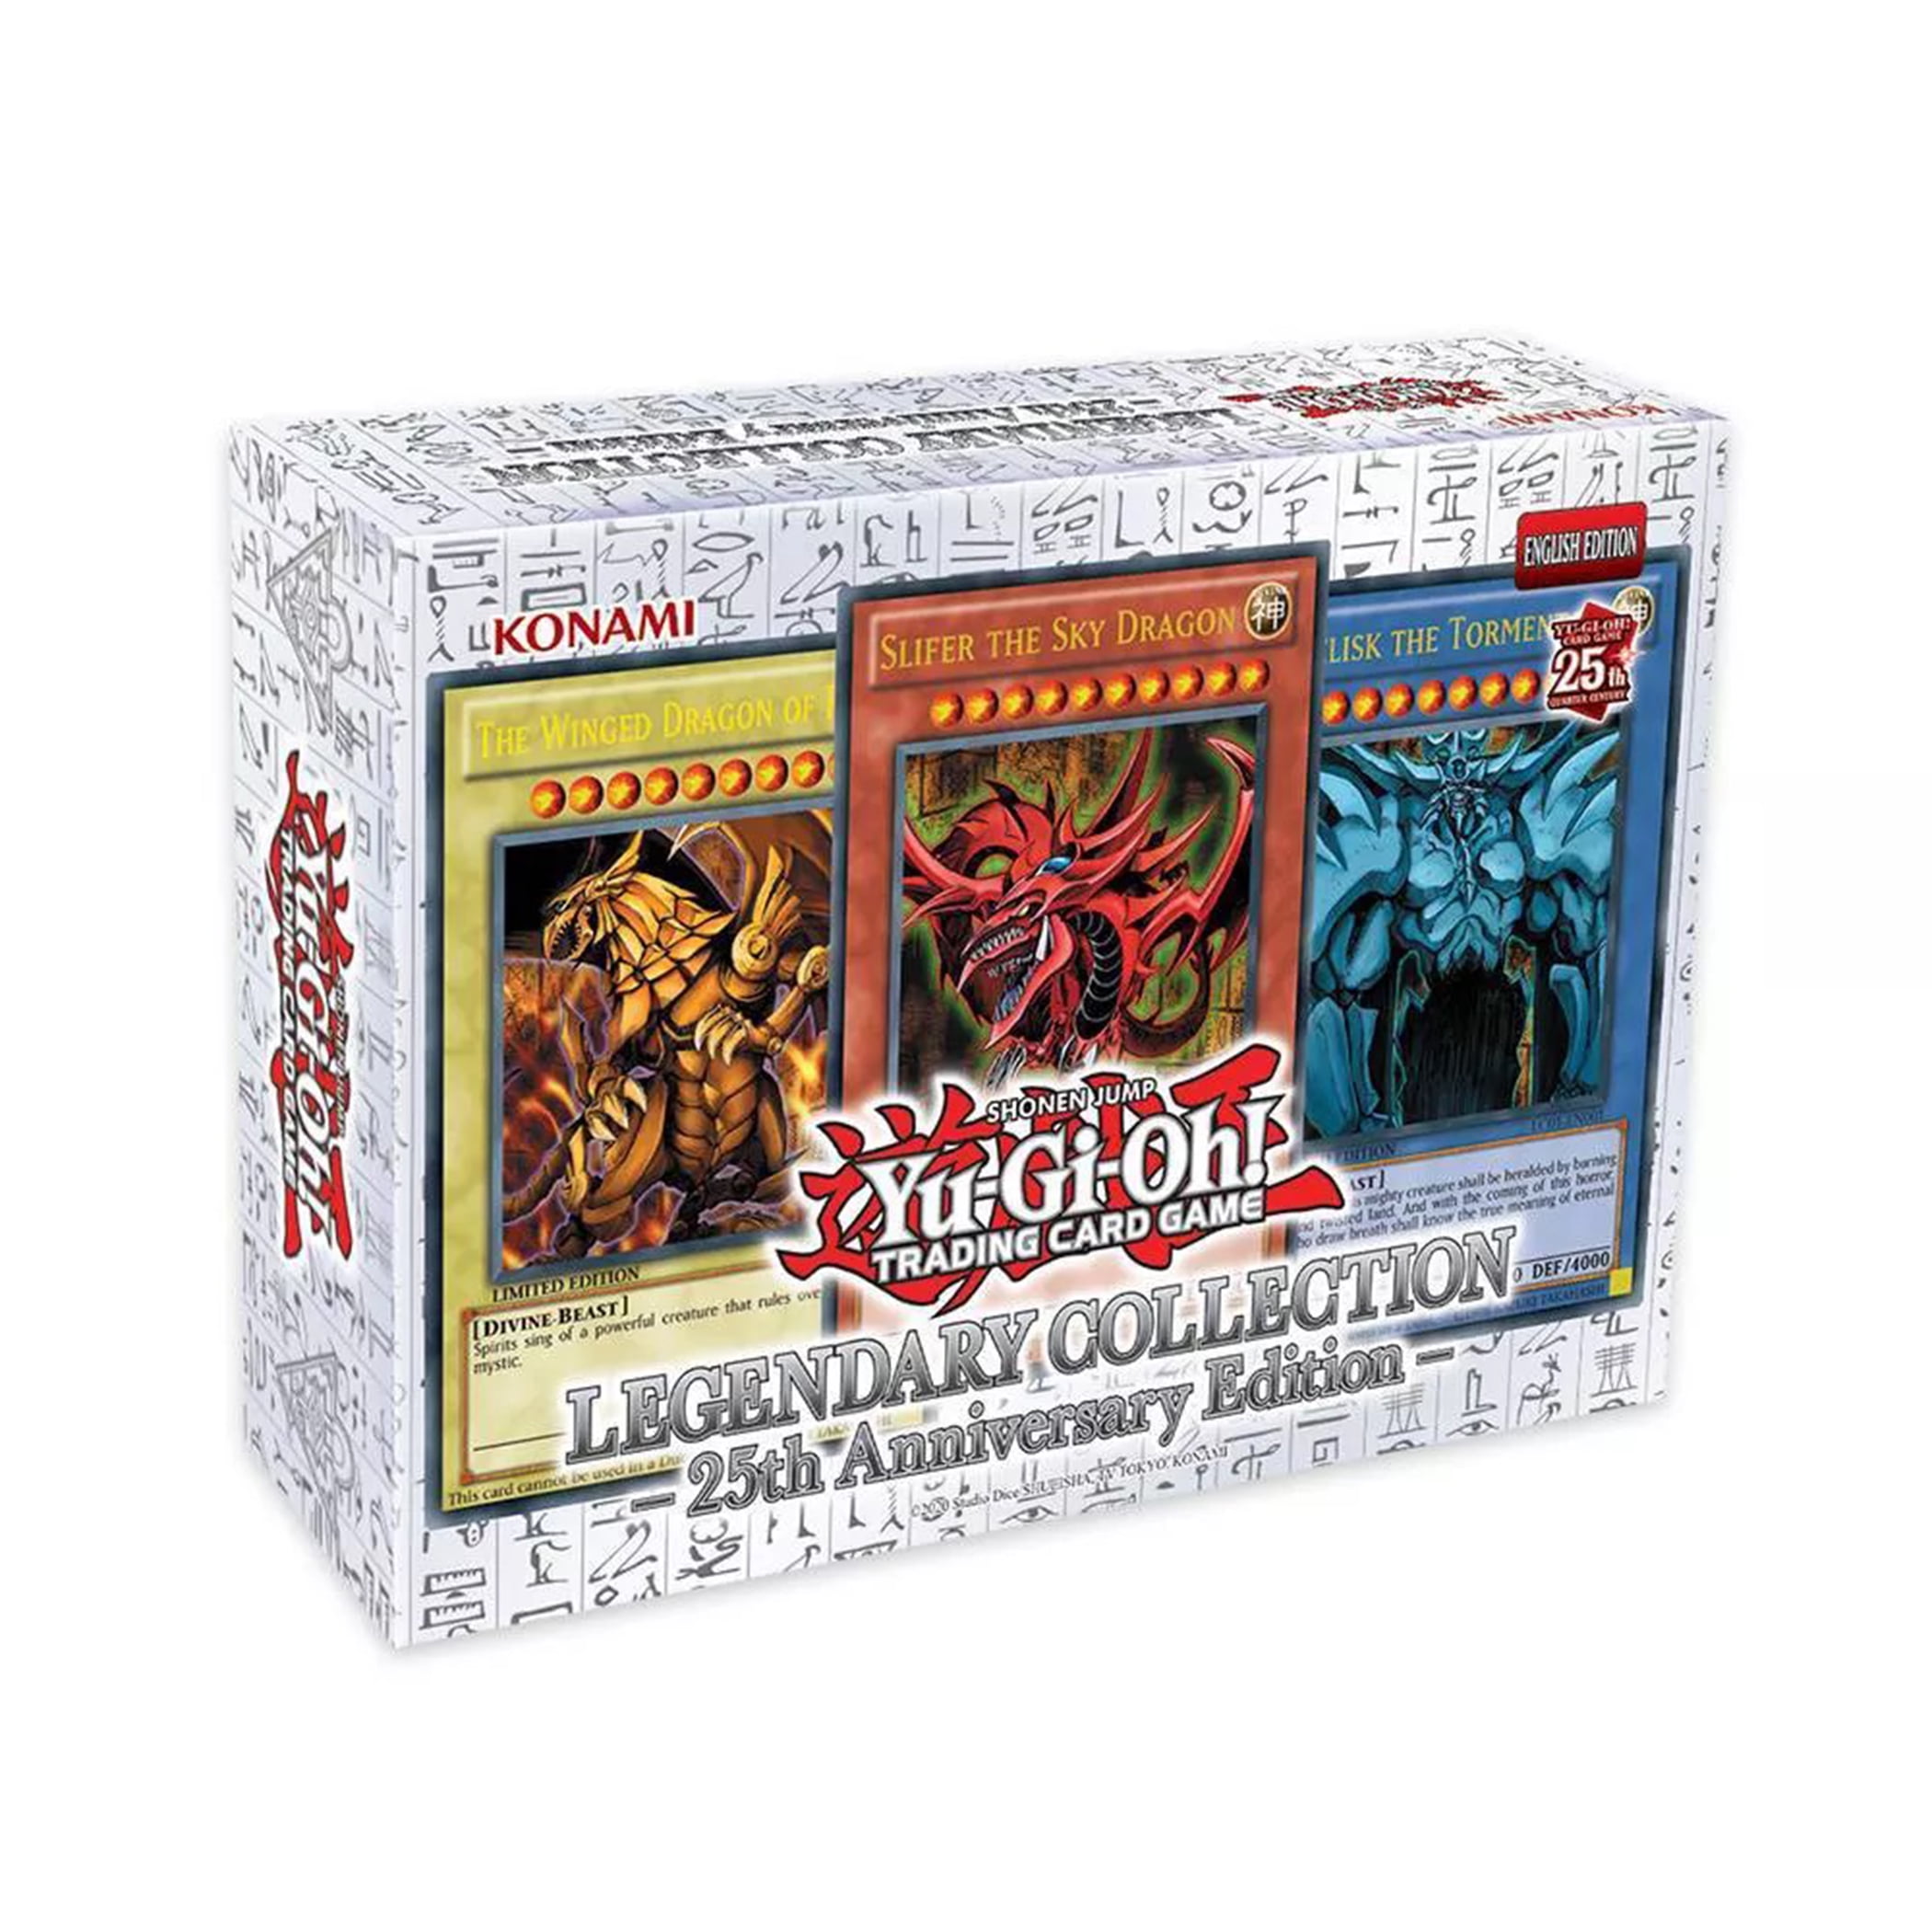 Yu-Gi-Oh! Trading Card Games Legendary Collection 25th Anniversary Box -  0.25lb